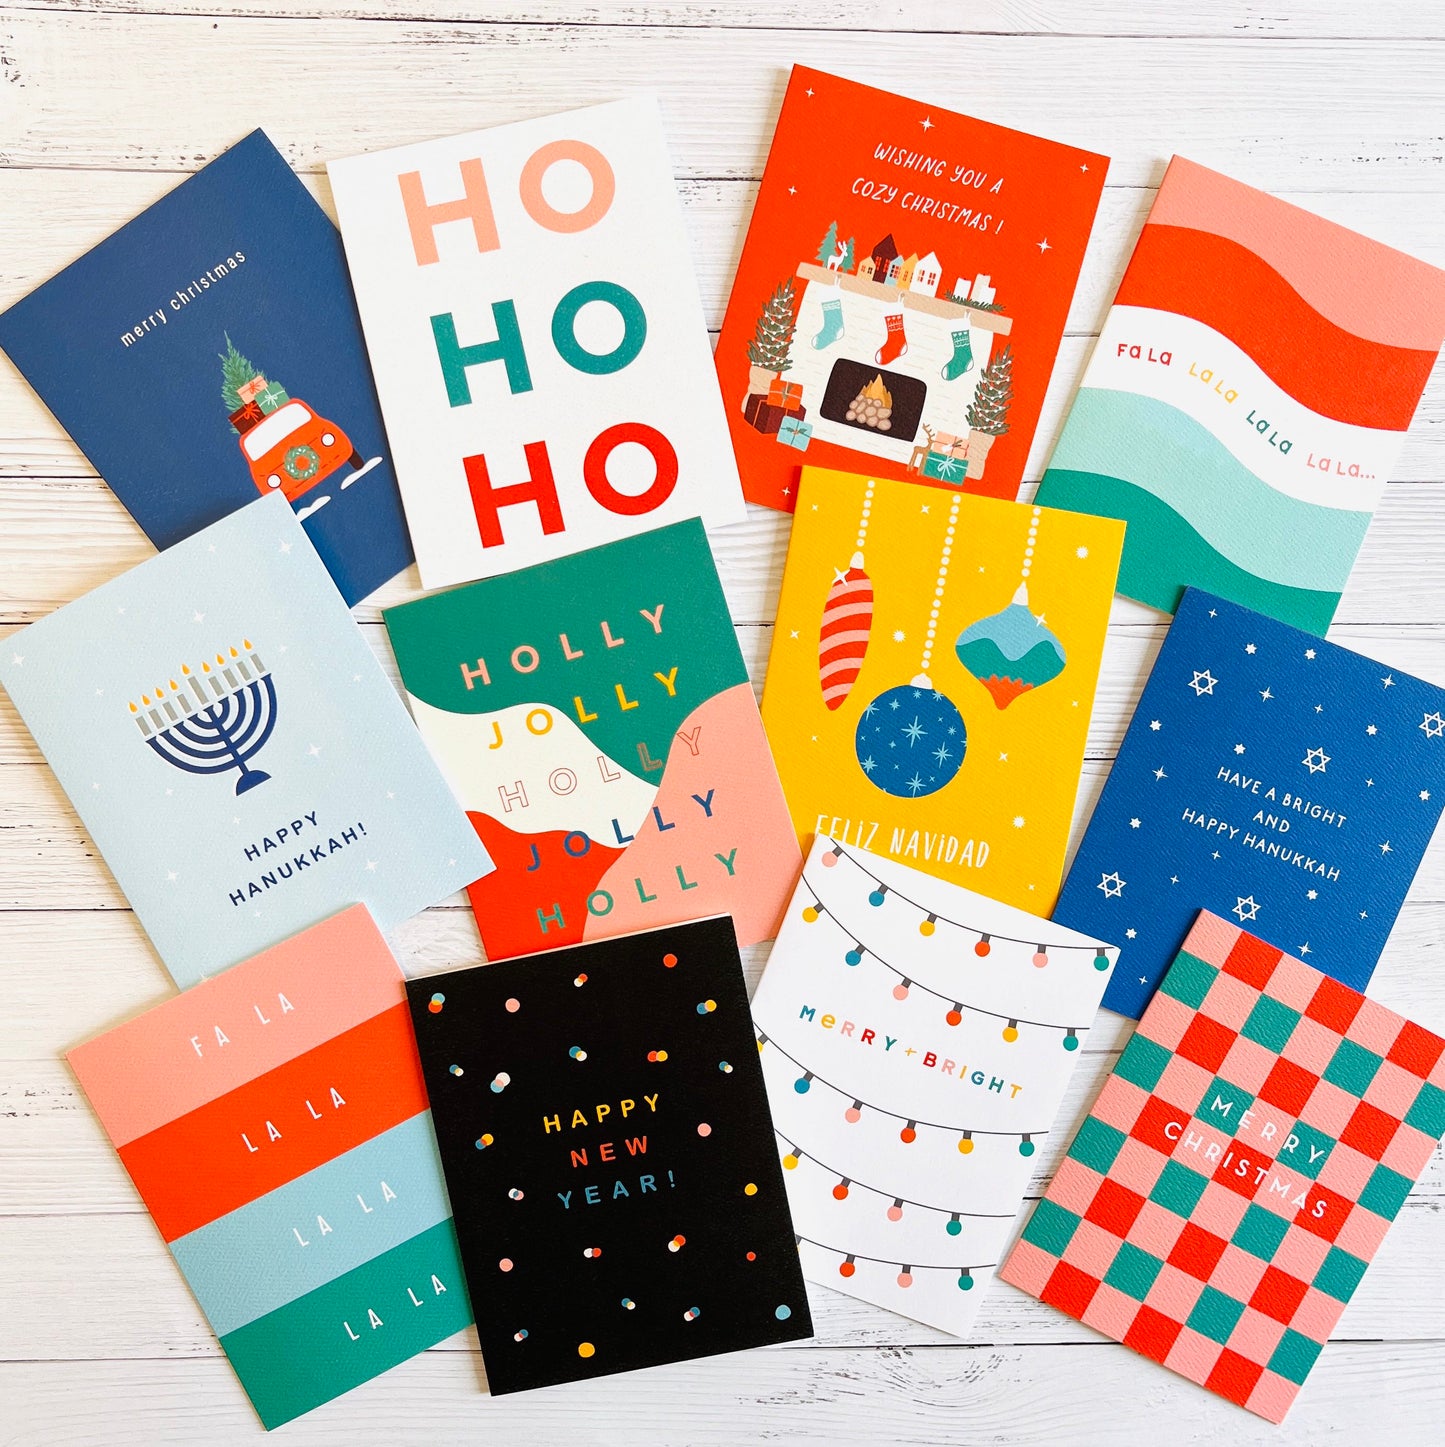 MYSTERY BAG - 10 Winter Holiday cards & Envelopes / Grab bag of 10 slightly imperfect or discontinued greeting cards